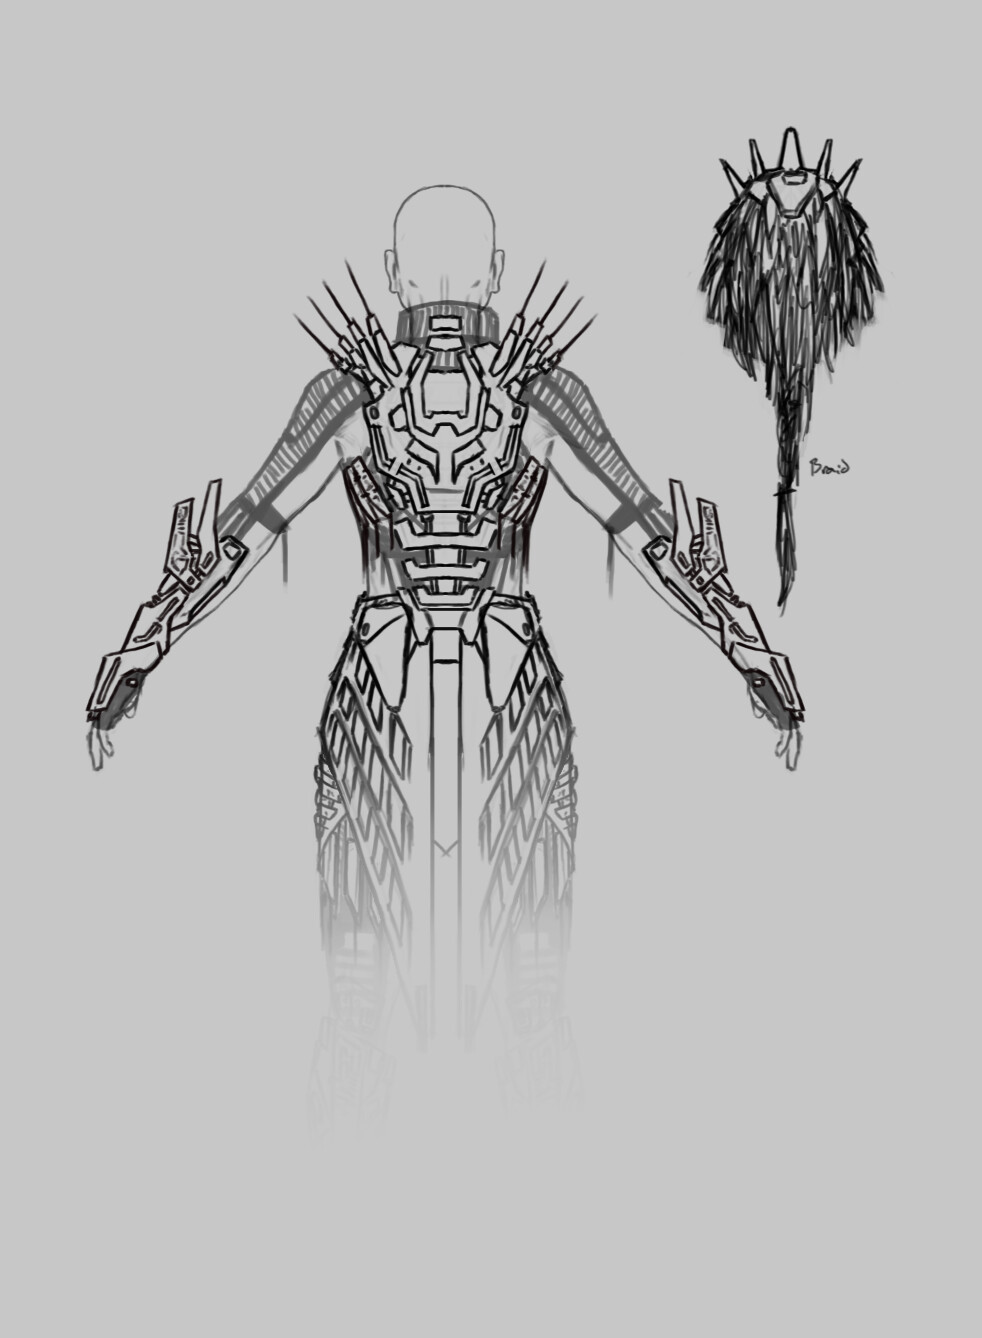 Main character armor sketch back